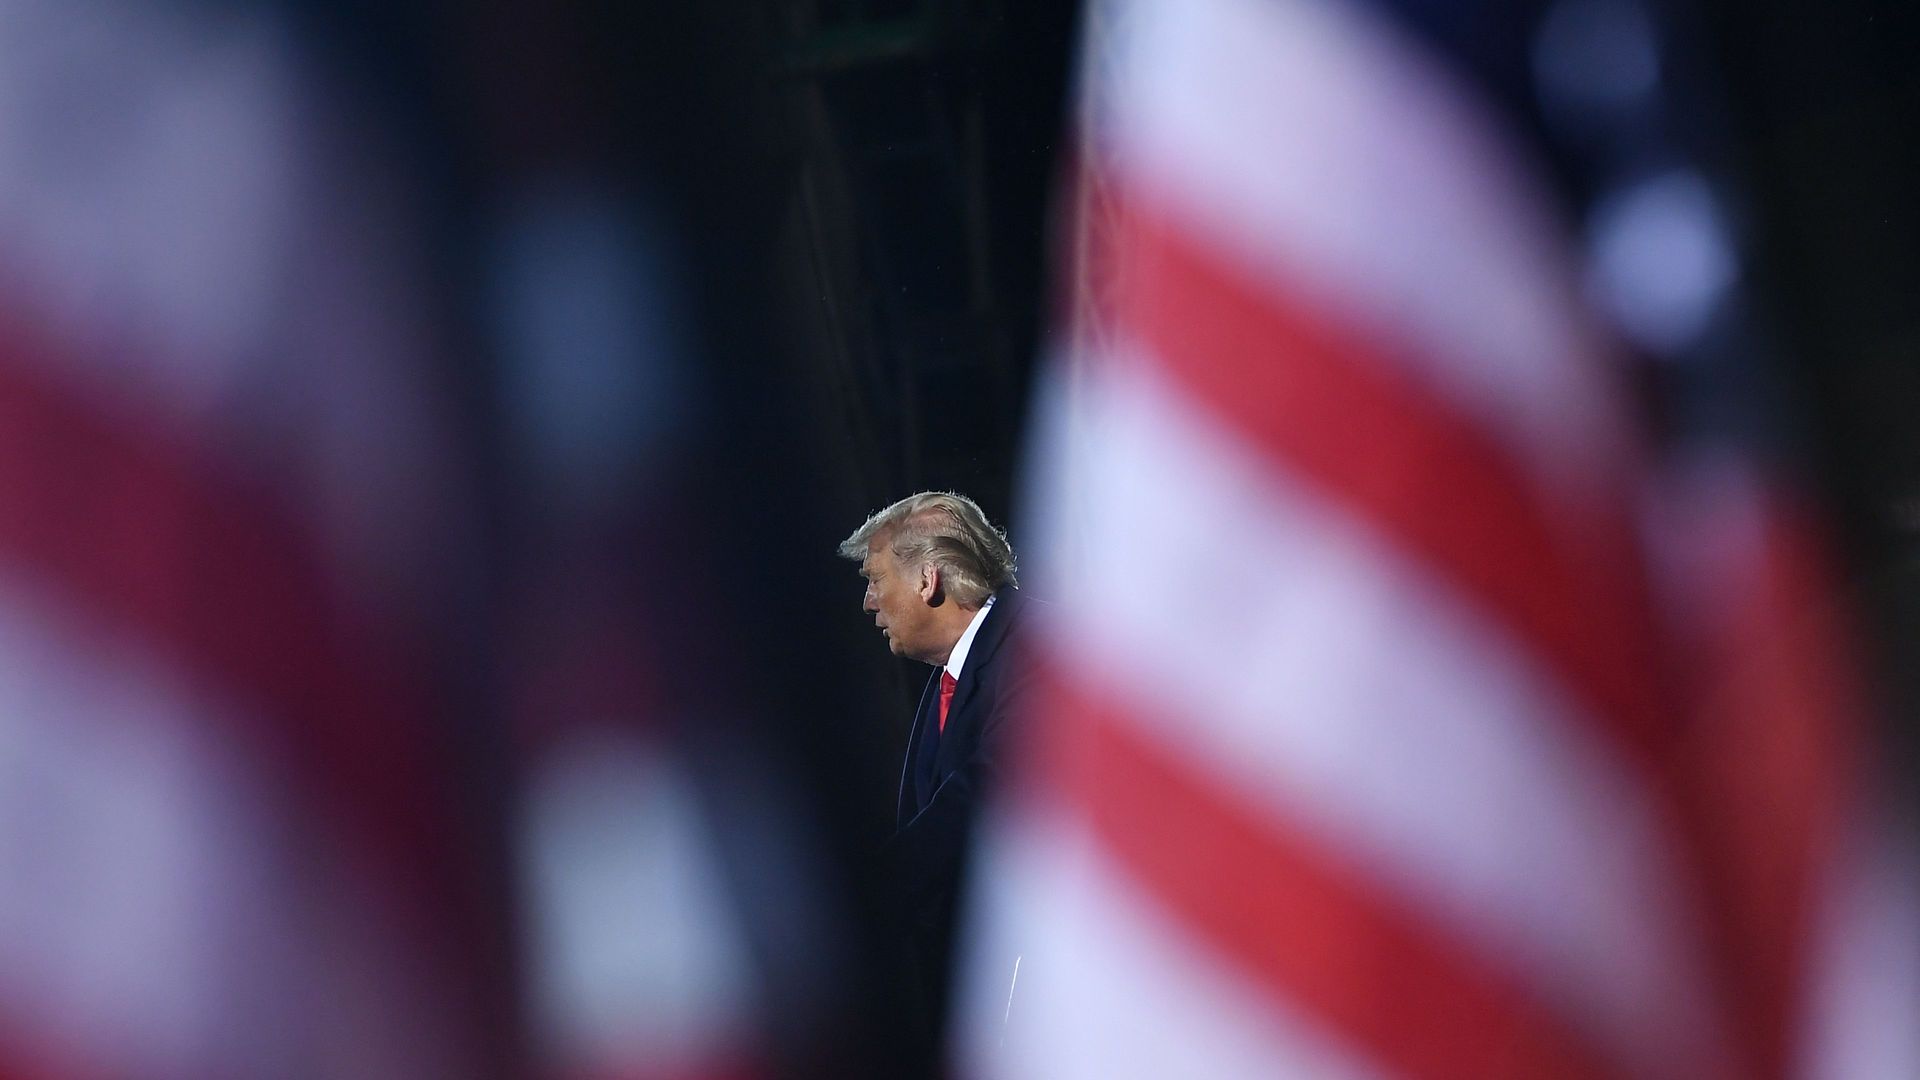 Donald Trump speaking at a podium, seen between two blurred American flags